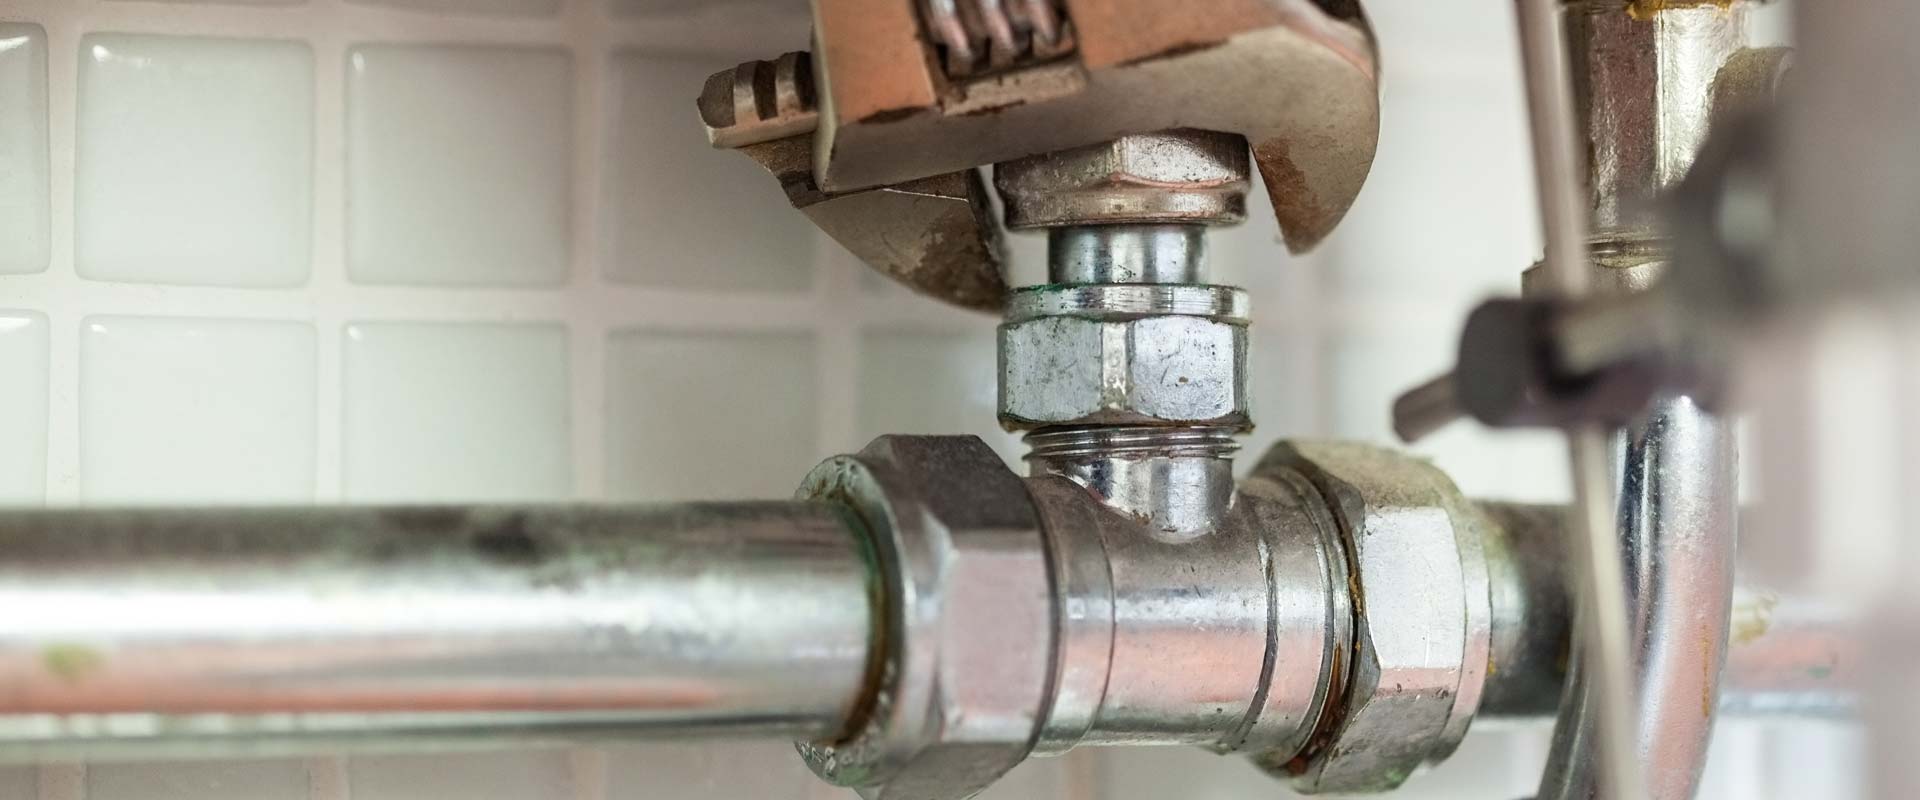 Close-up of a pipe being fixed by a plumber